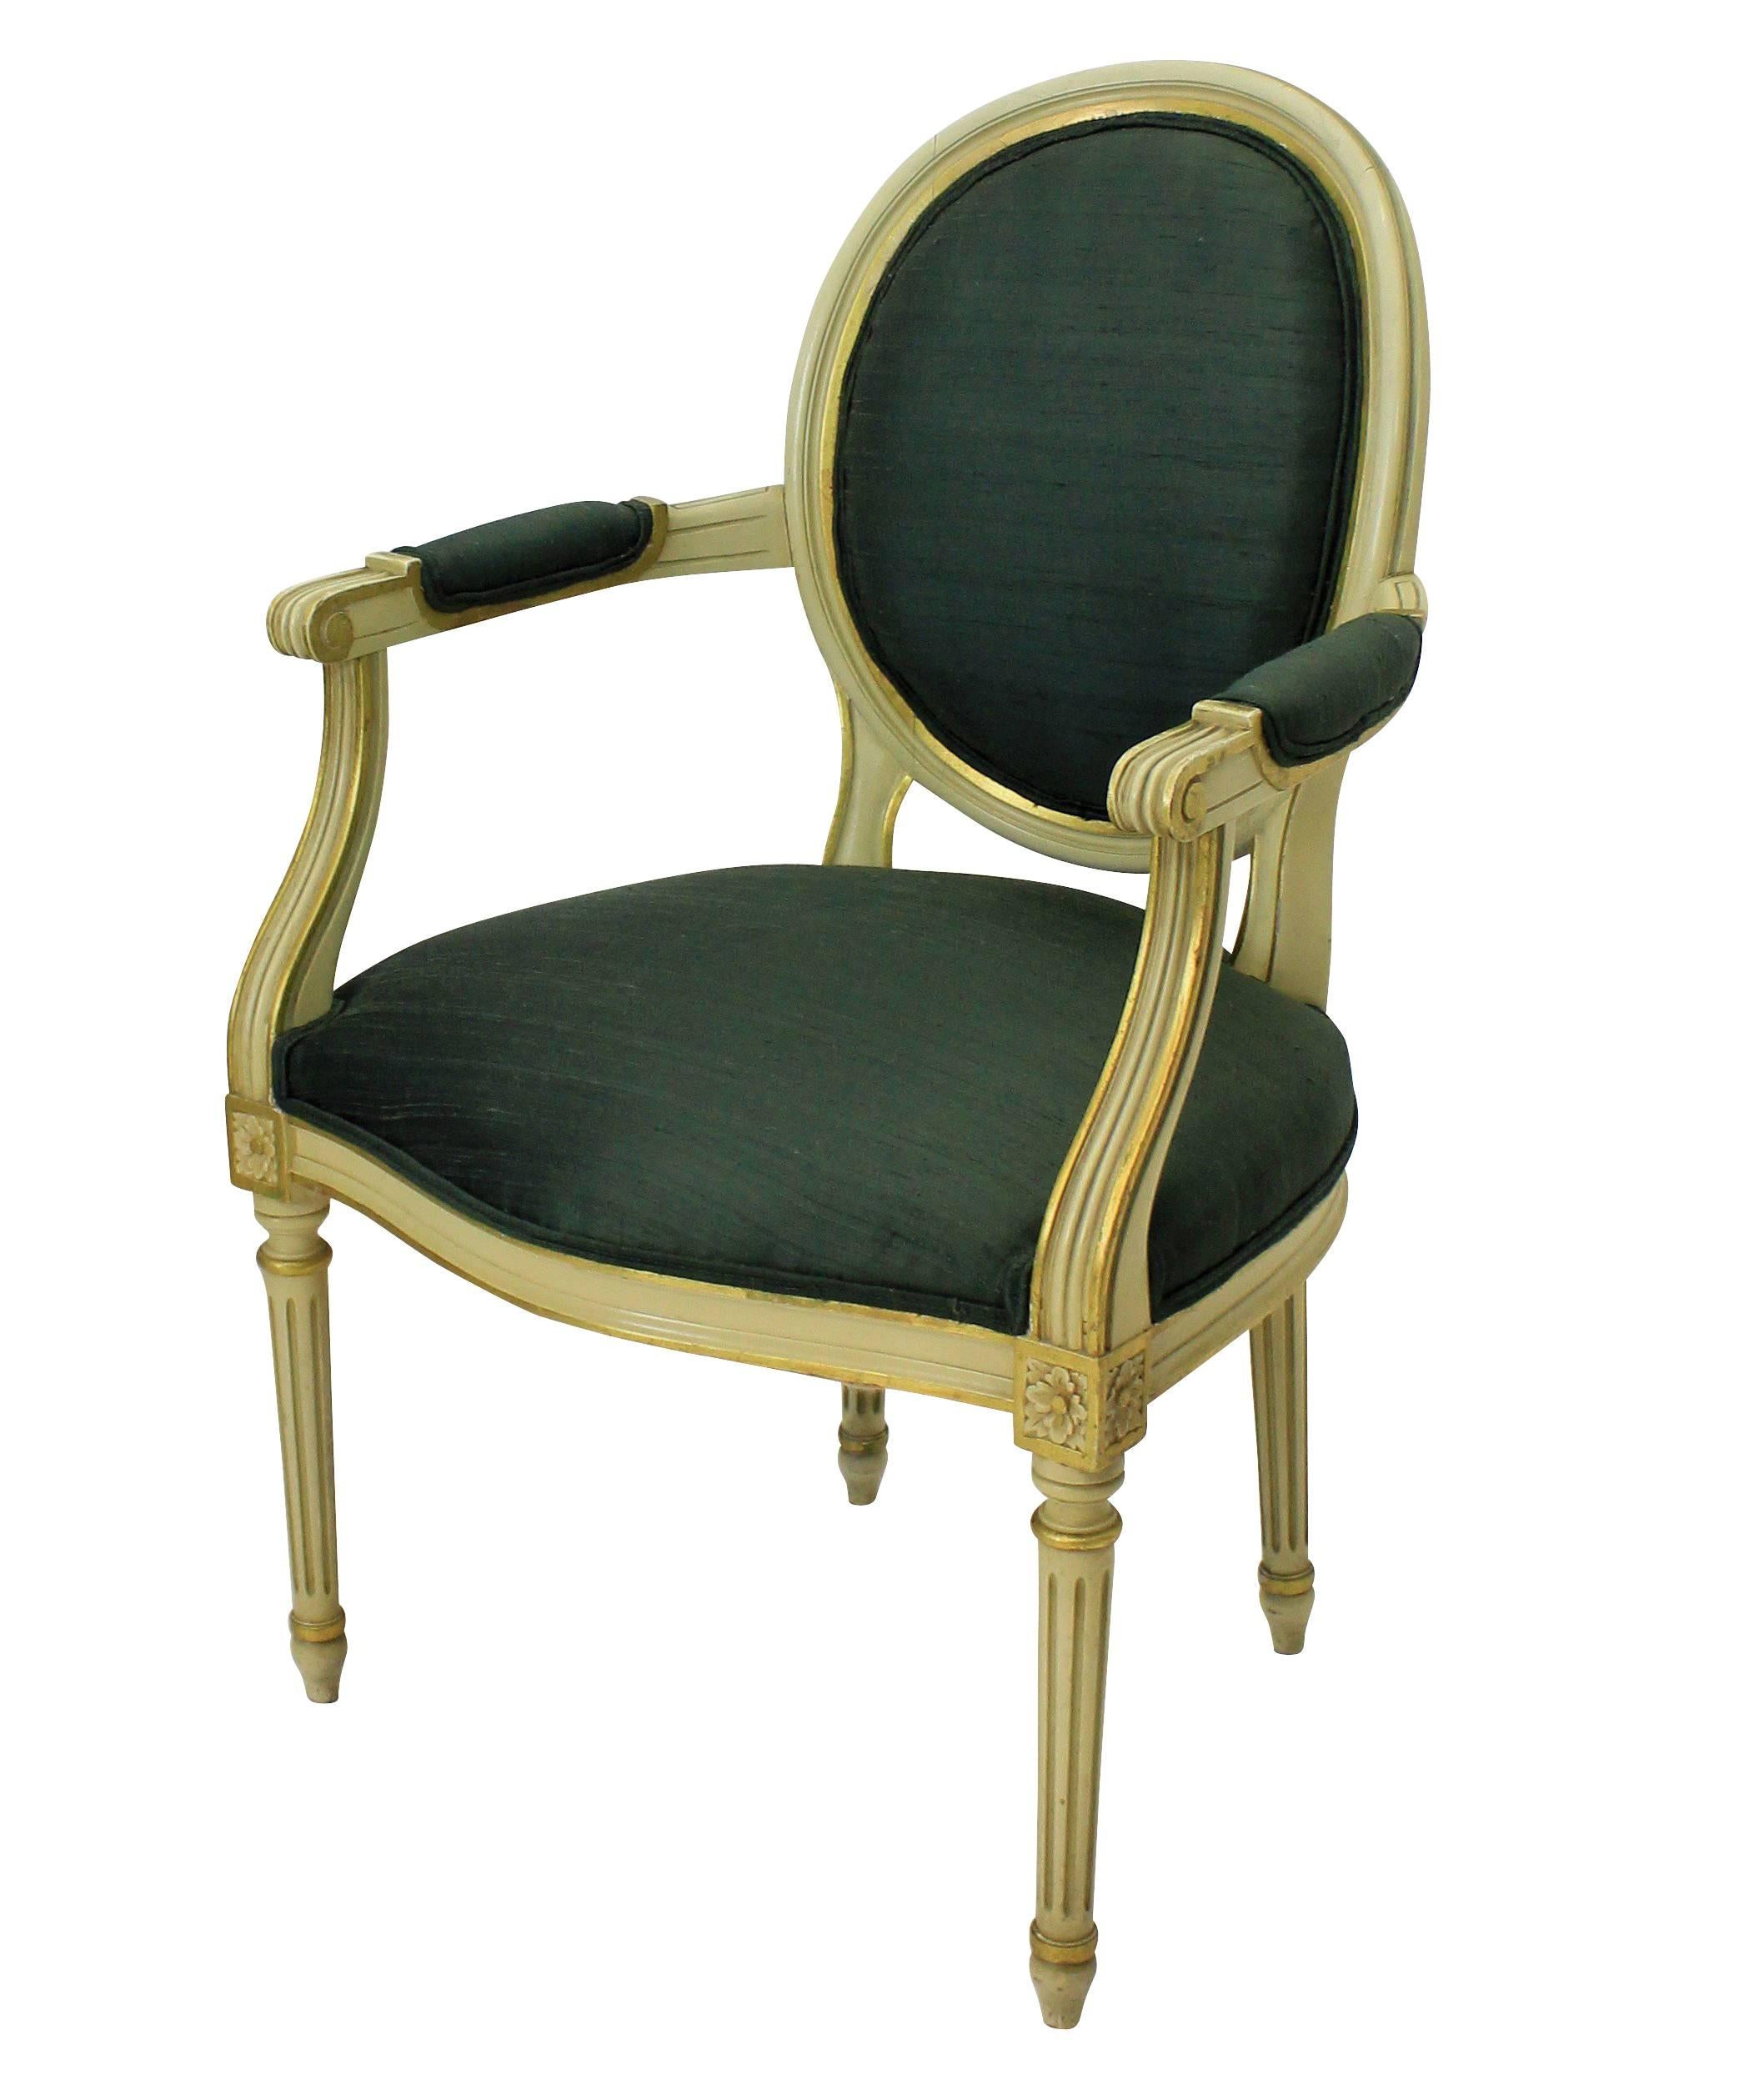 A pair of French painted and gilded Louis XV style armchairs upholstered in sage green silk.
 